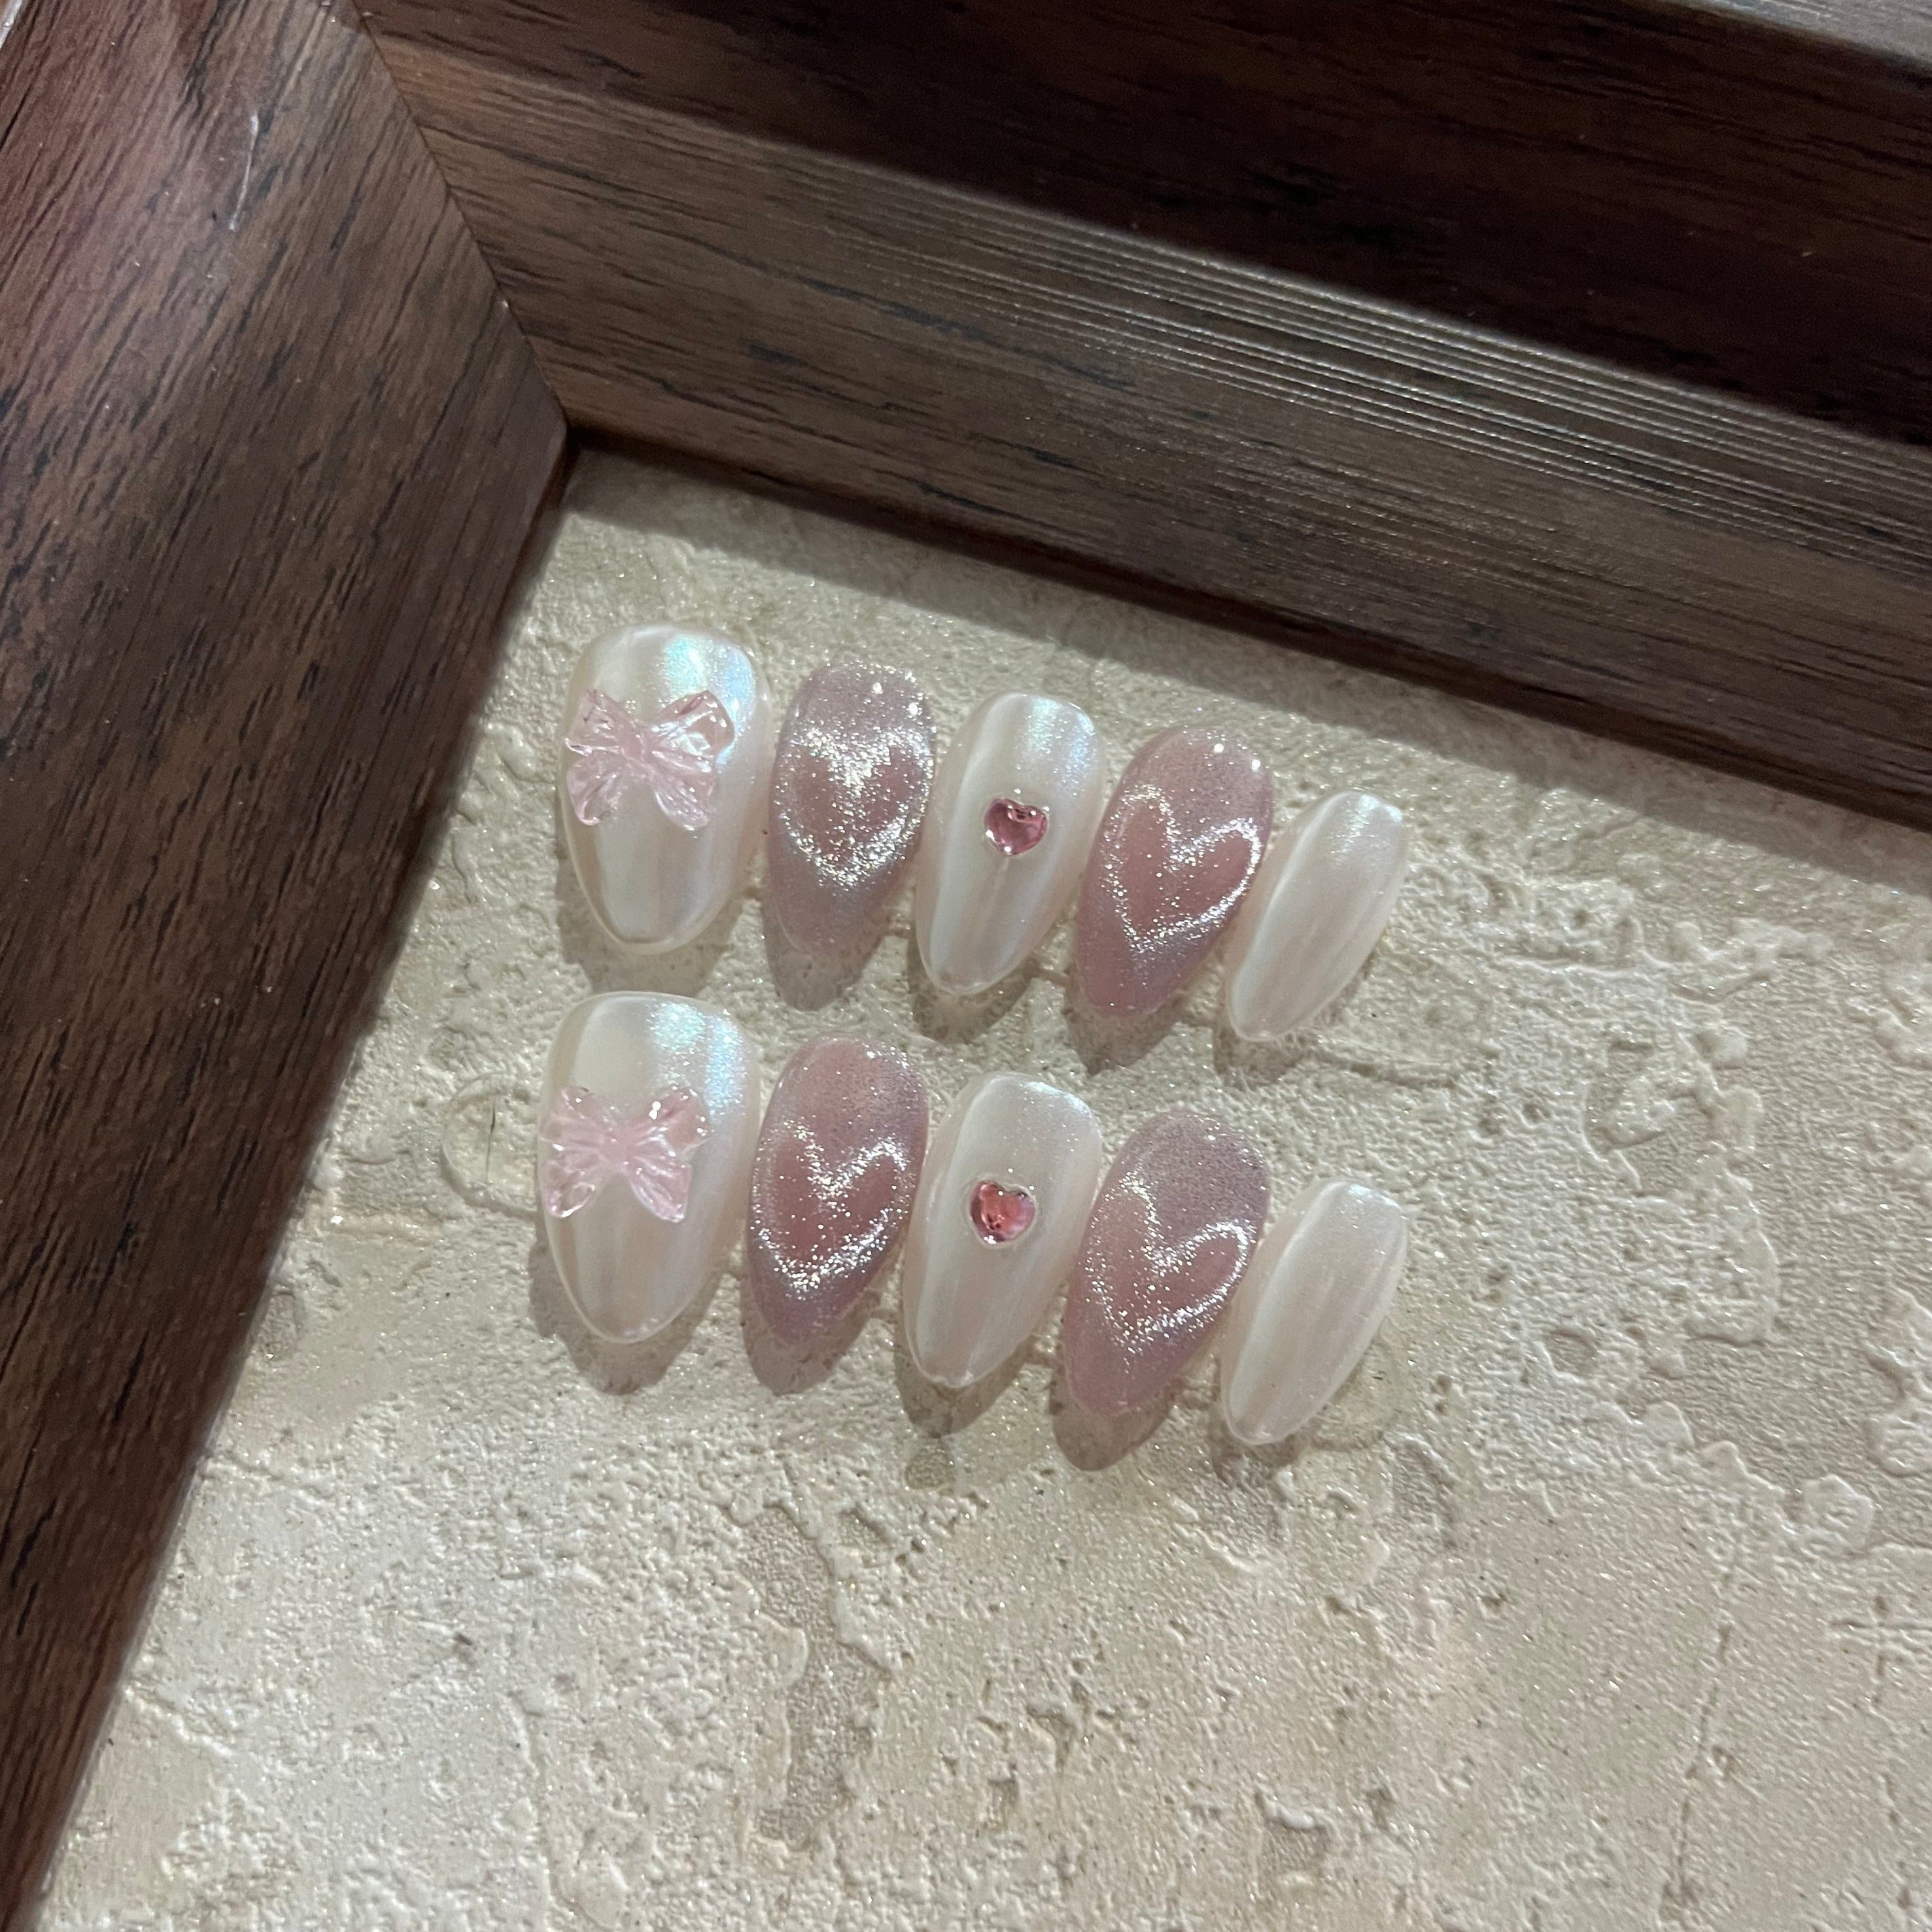 HEARTBEAT-TEN PIECES OF HANDCRAFTED PRESS ON NAIL